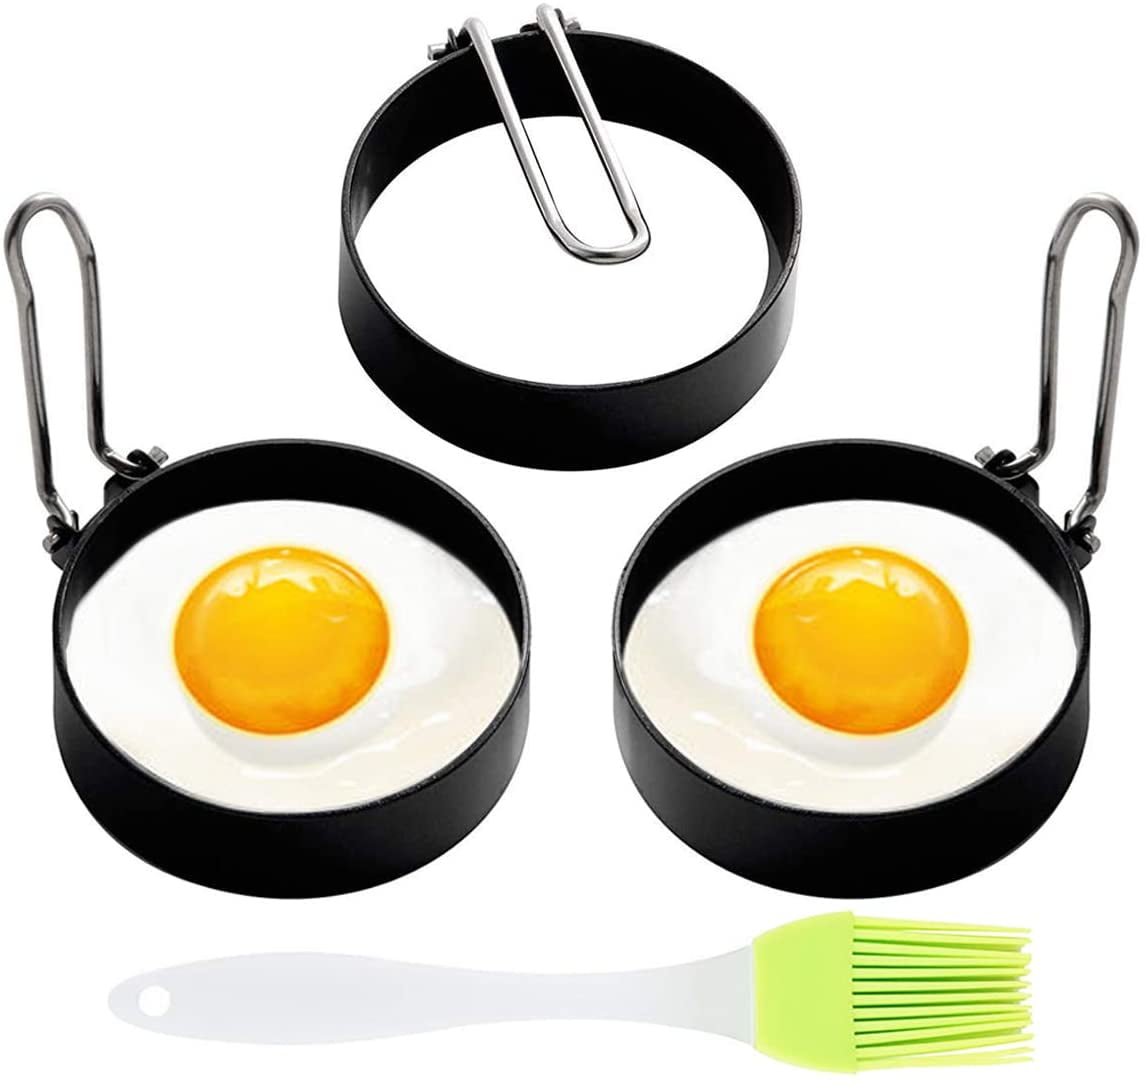 Yubng 35 inch Stainless Steel Egg Rings for Egg Mcmuffins, 4 Pack, Egg Molds for Frying Eggs, Mini Pancakes Ring with Anti-scald Handle 4 Pack, 35Inc